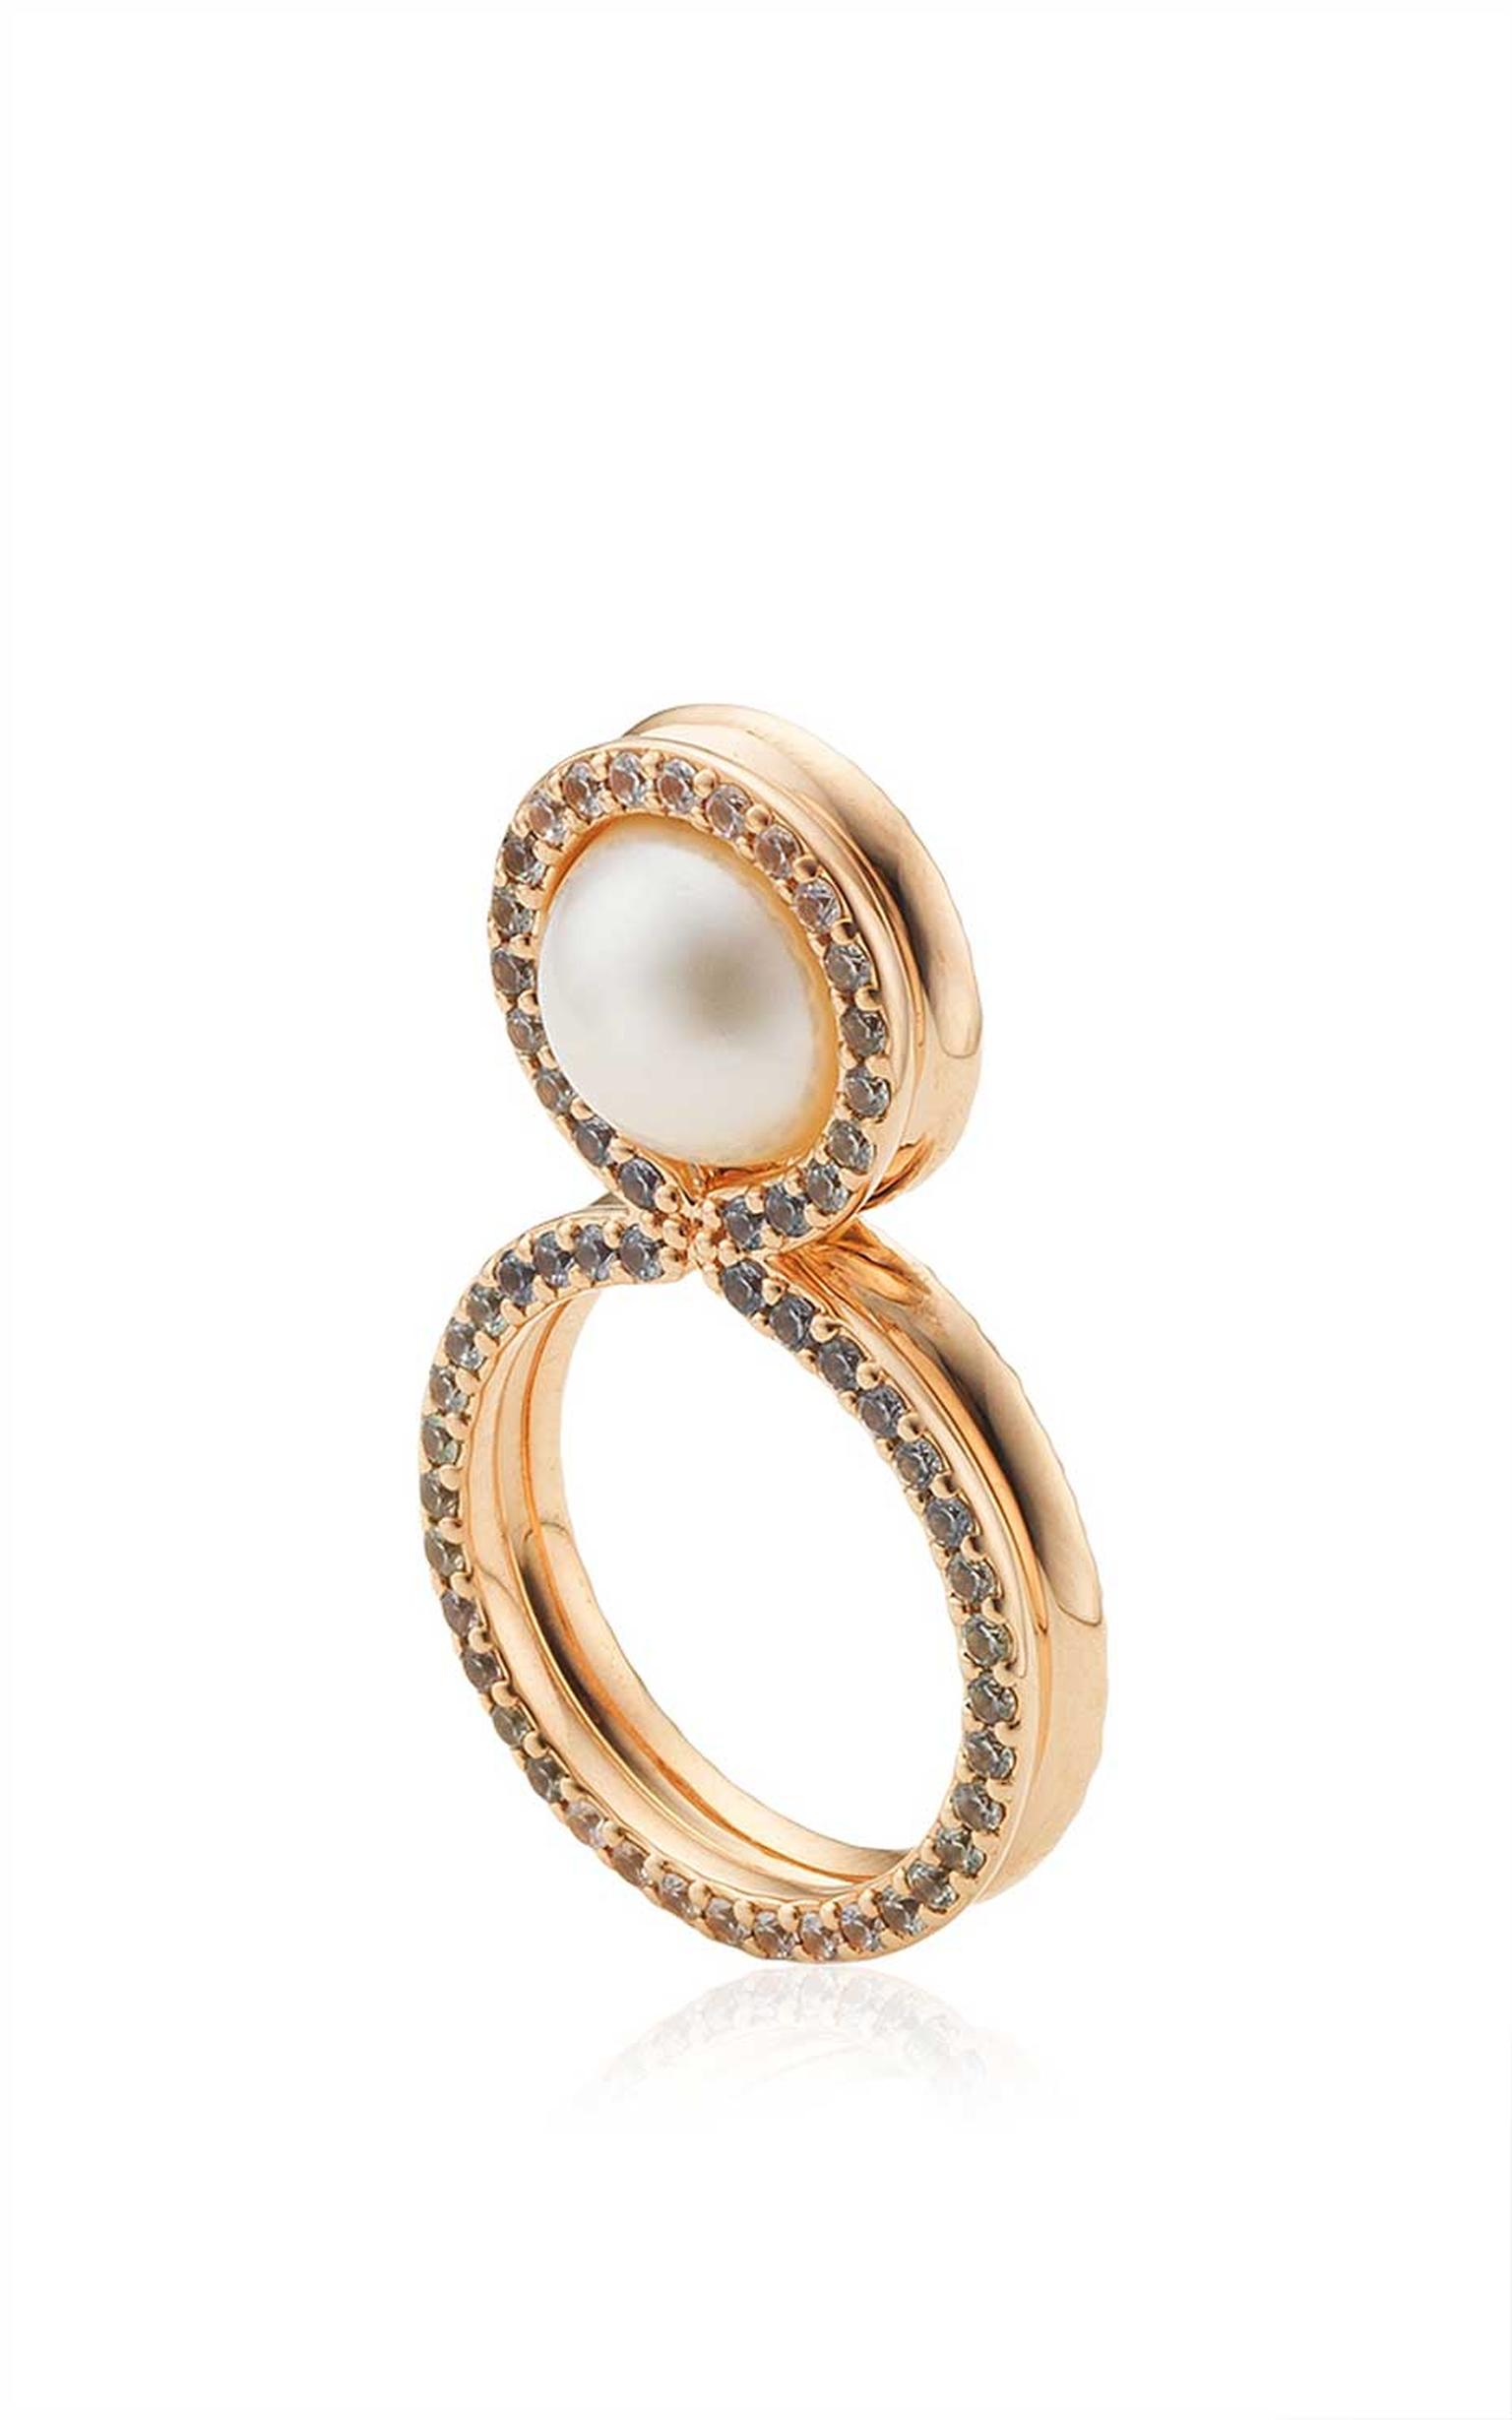 Melanie Georgacopoulos' Glow 8 Ring in 18ct rose gold with sapphires and 10mm white fresh water pearl.